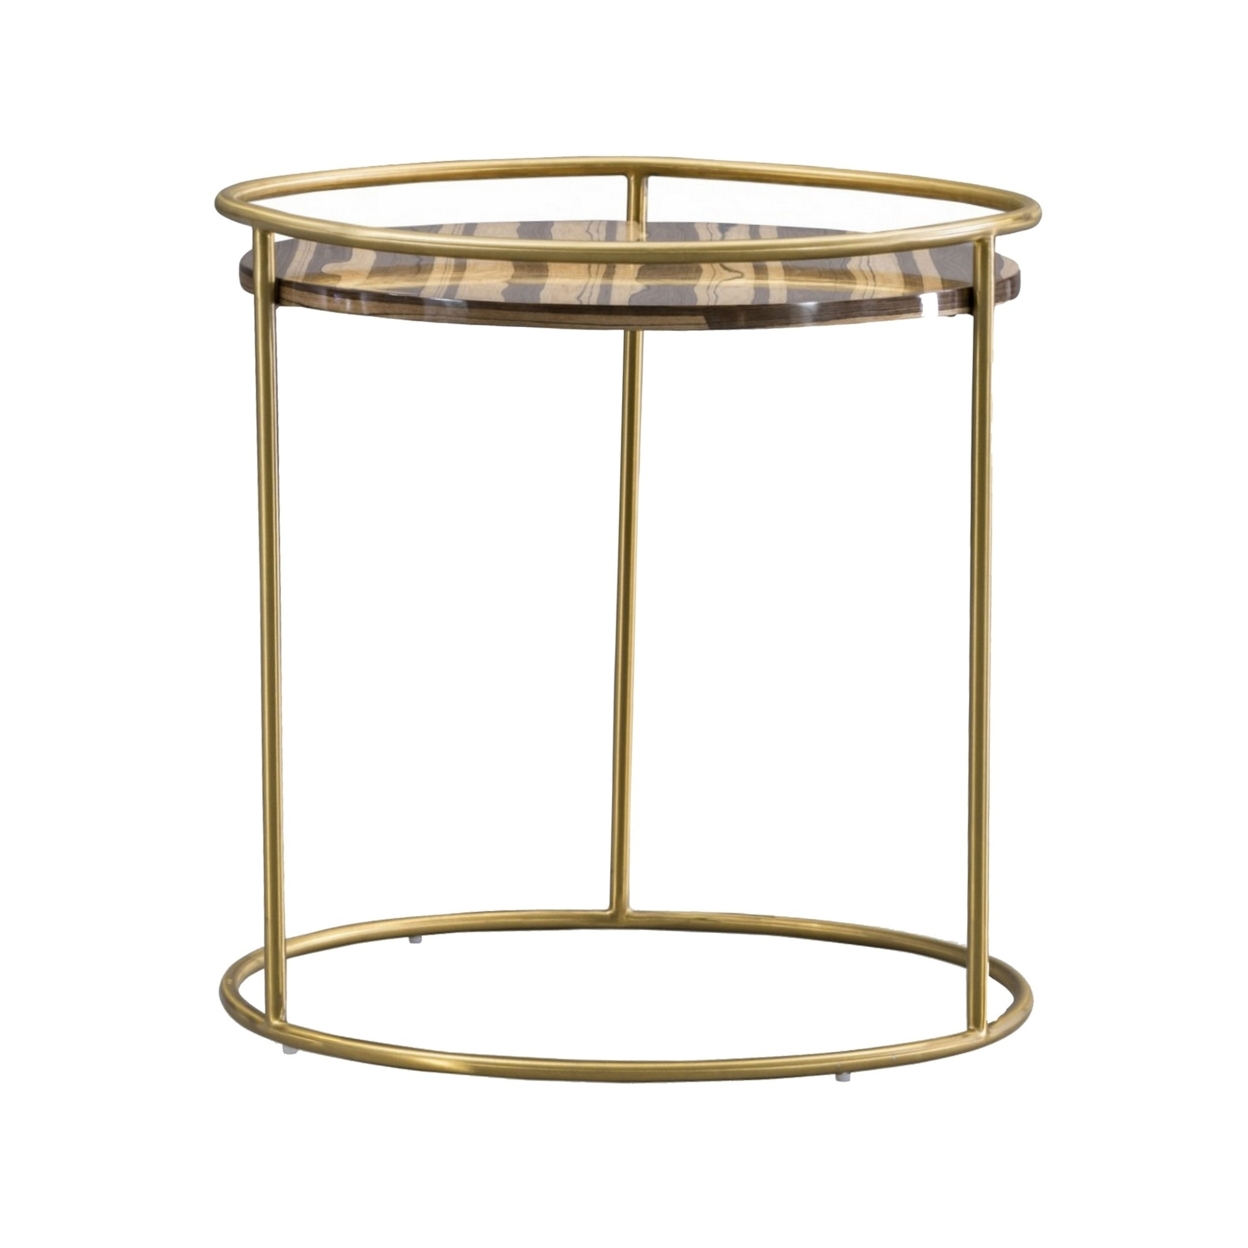 Round Faux Marble Top End Table With Steel Frame, Brown And Gold- Saltoro Sherpi